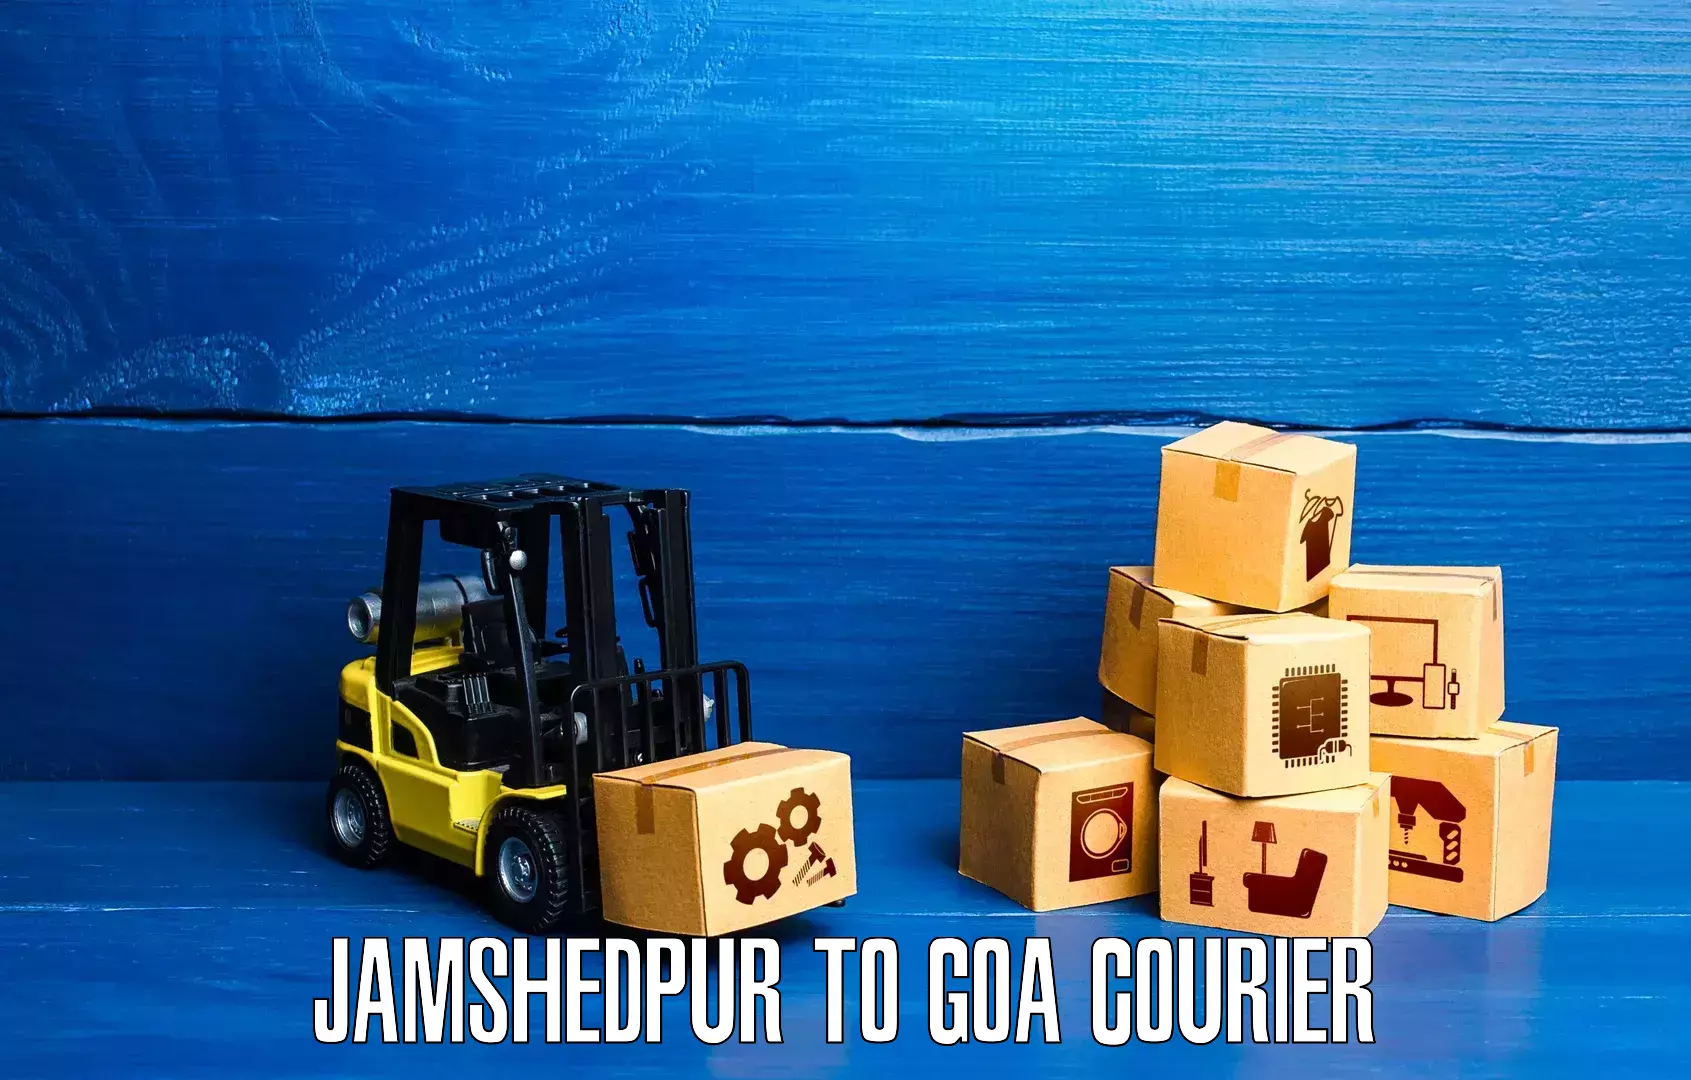 Global courier networks Jamshedpur to Panjim